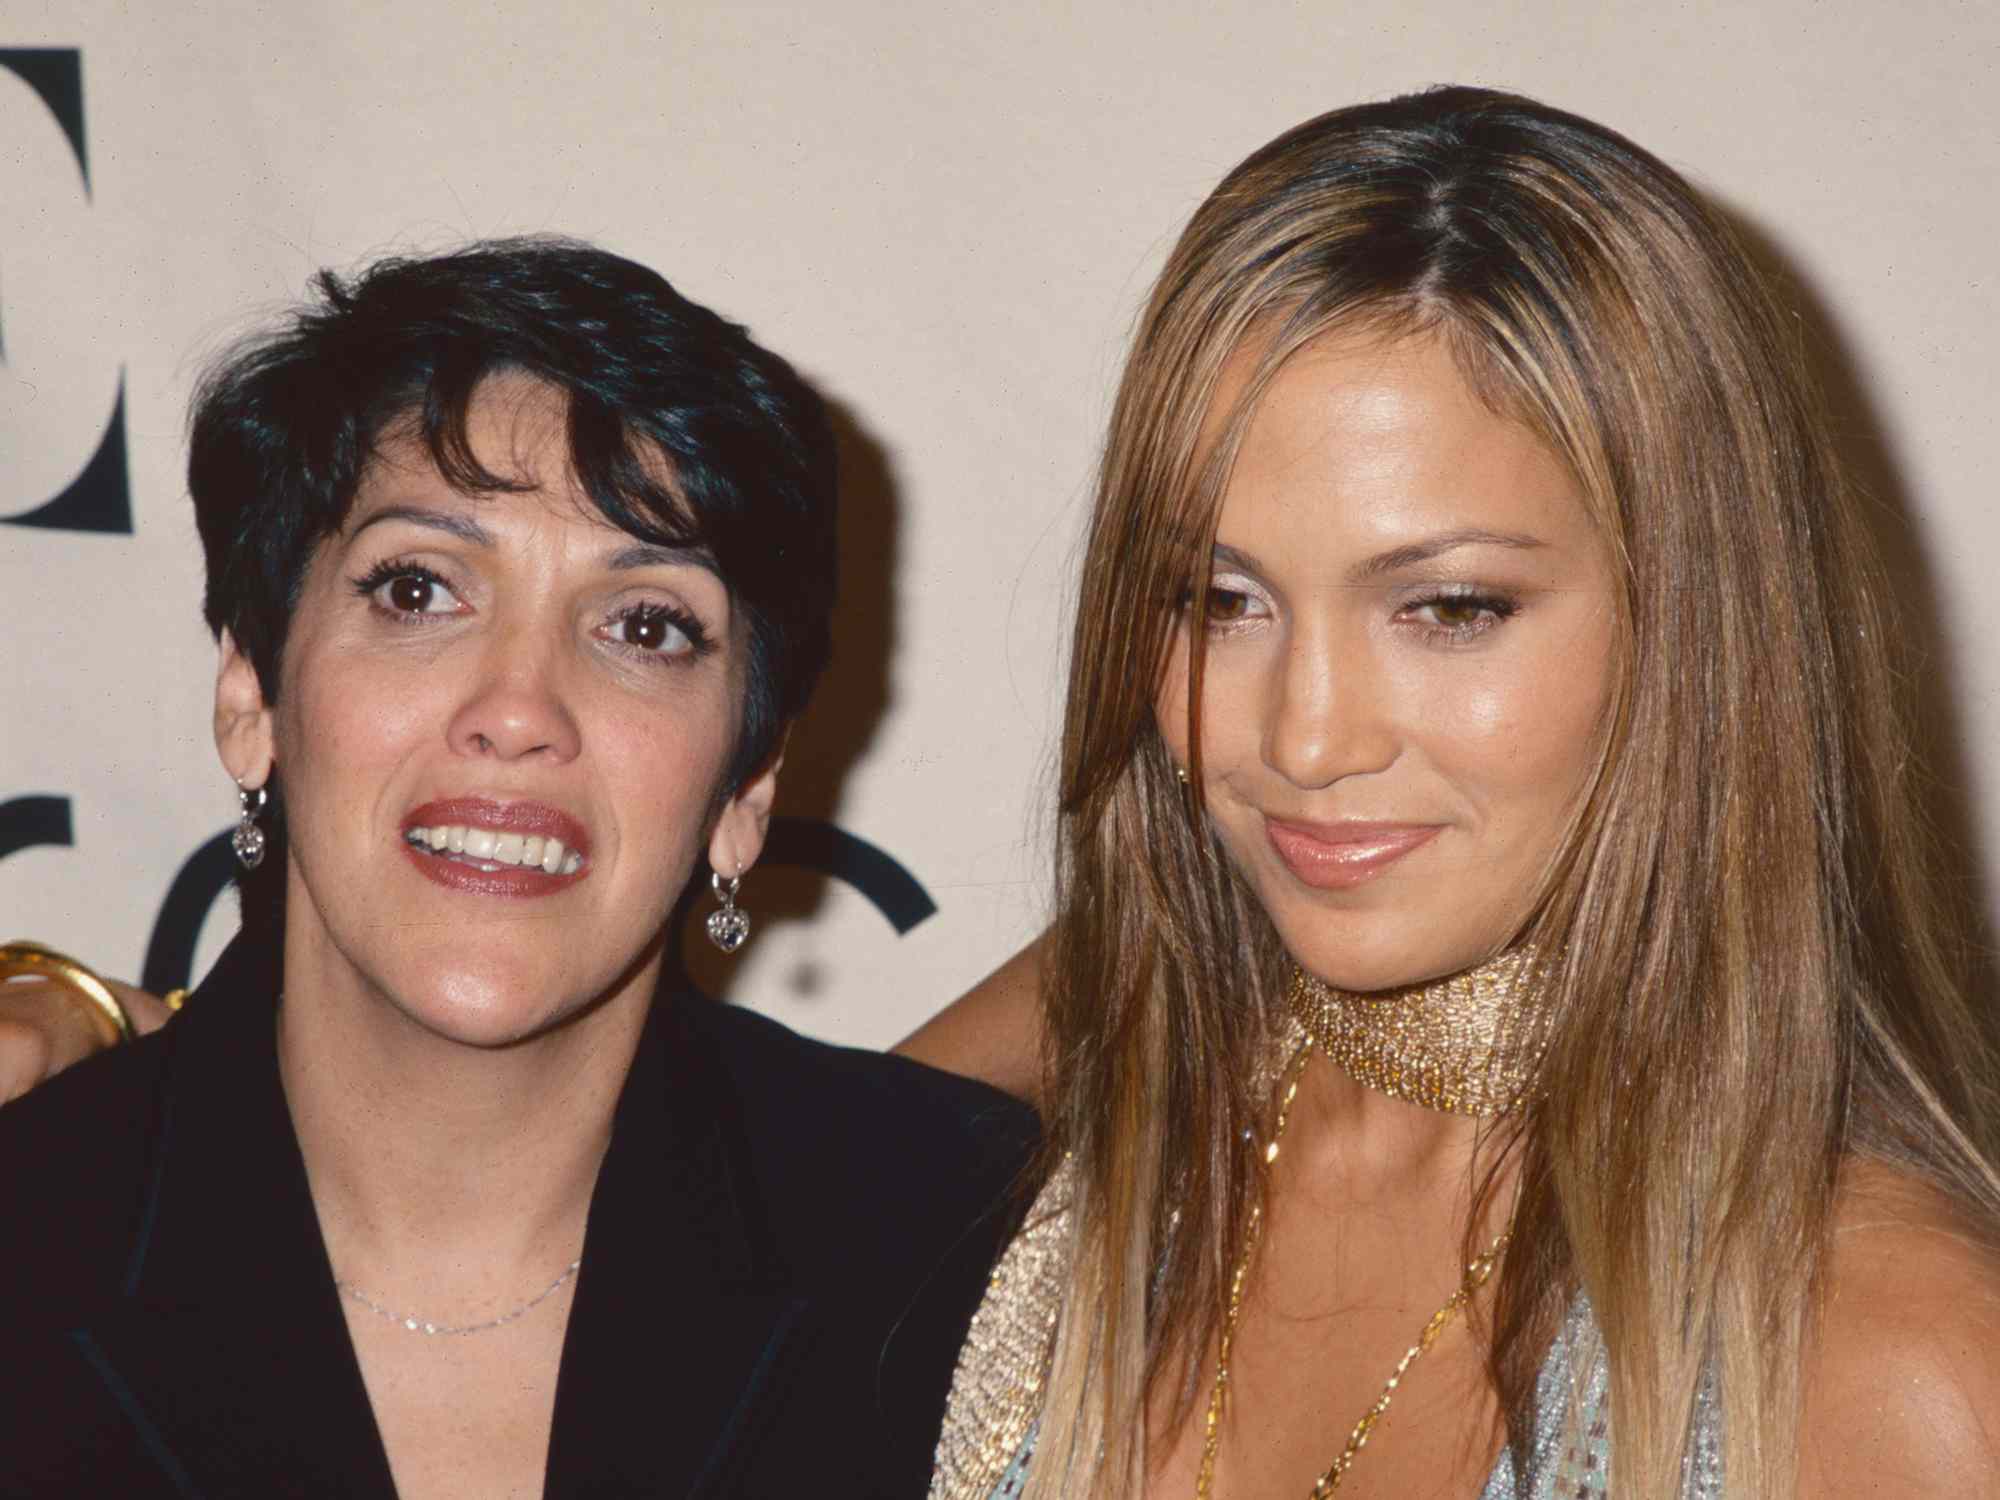 Jennifer Lopez and mother Guadalupe Rodriguez attend VH1 Vogue Fashion Awards on October 20, 2000 in New York City.